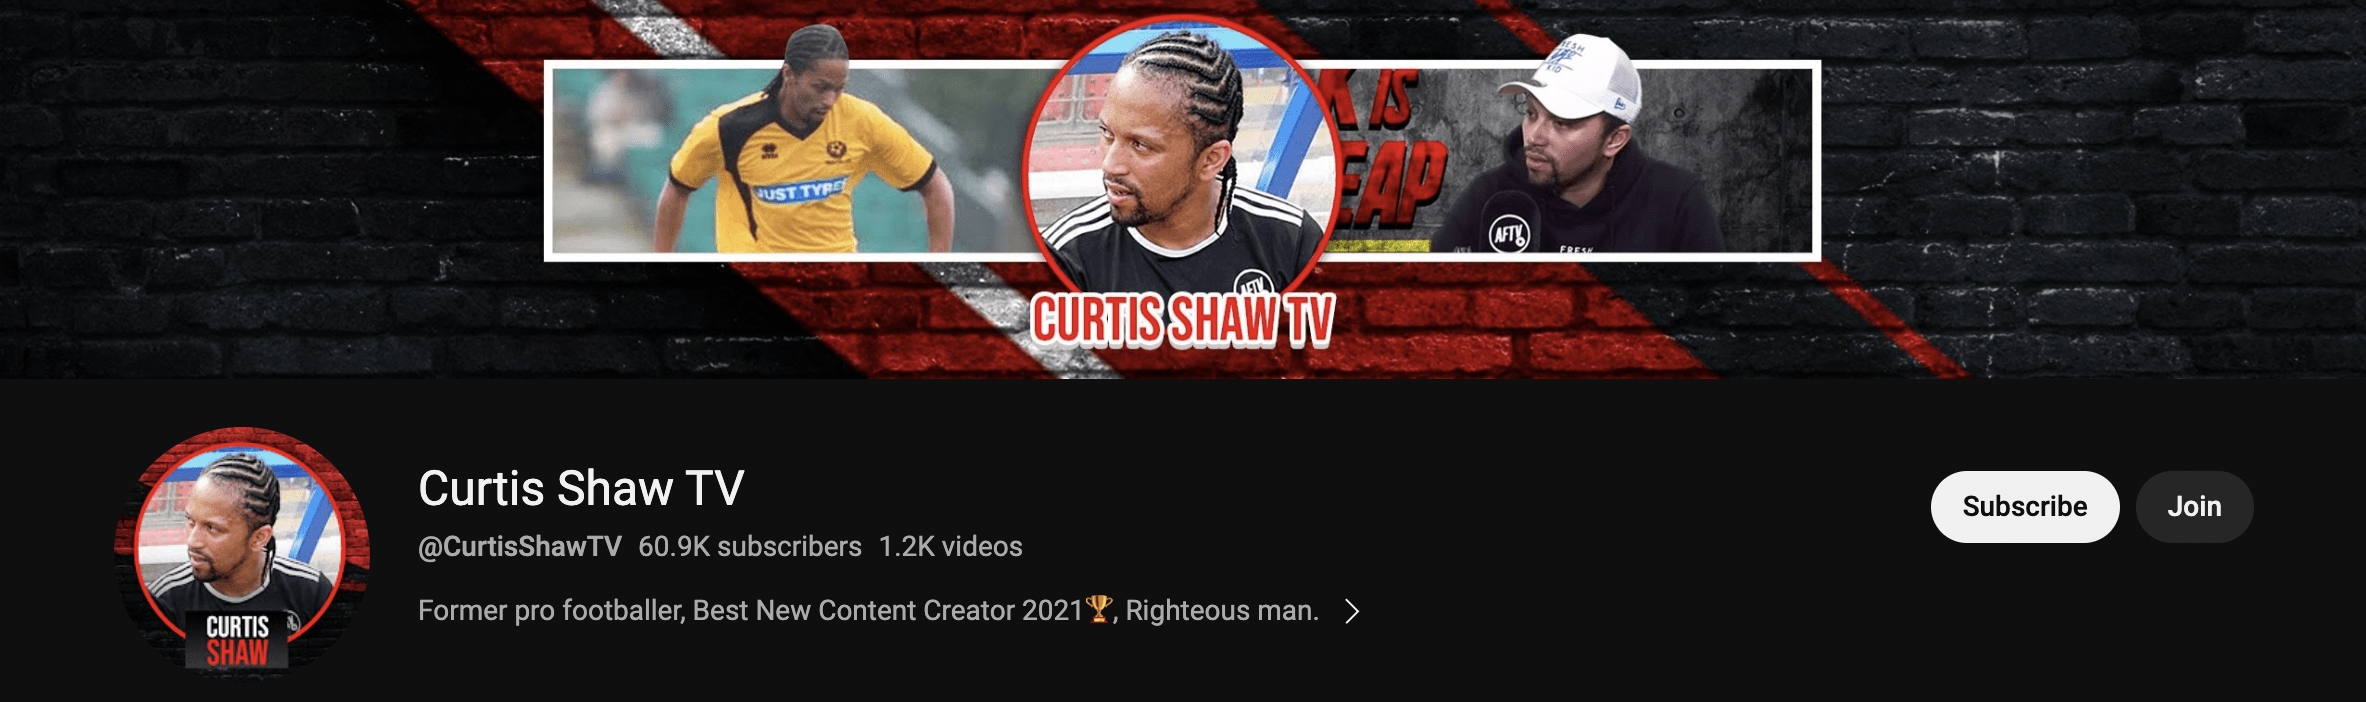 Curtis Shaw TV Youtube Cover